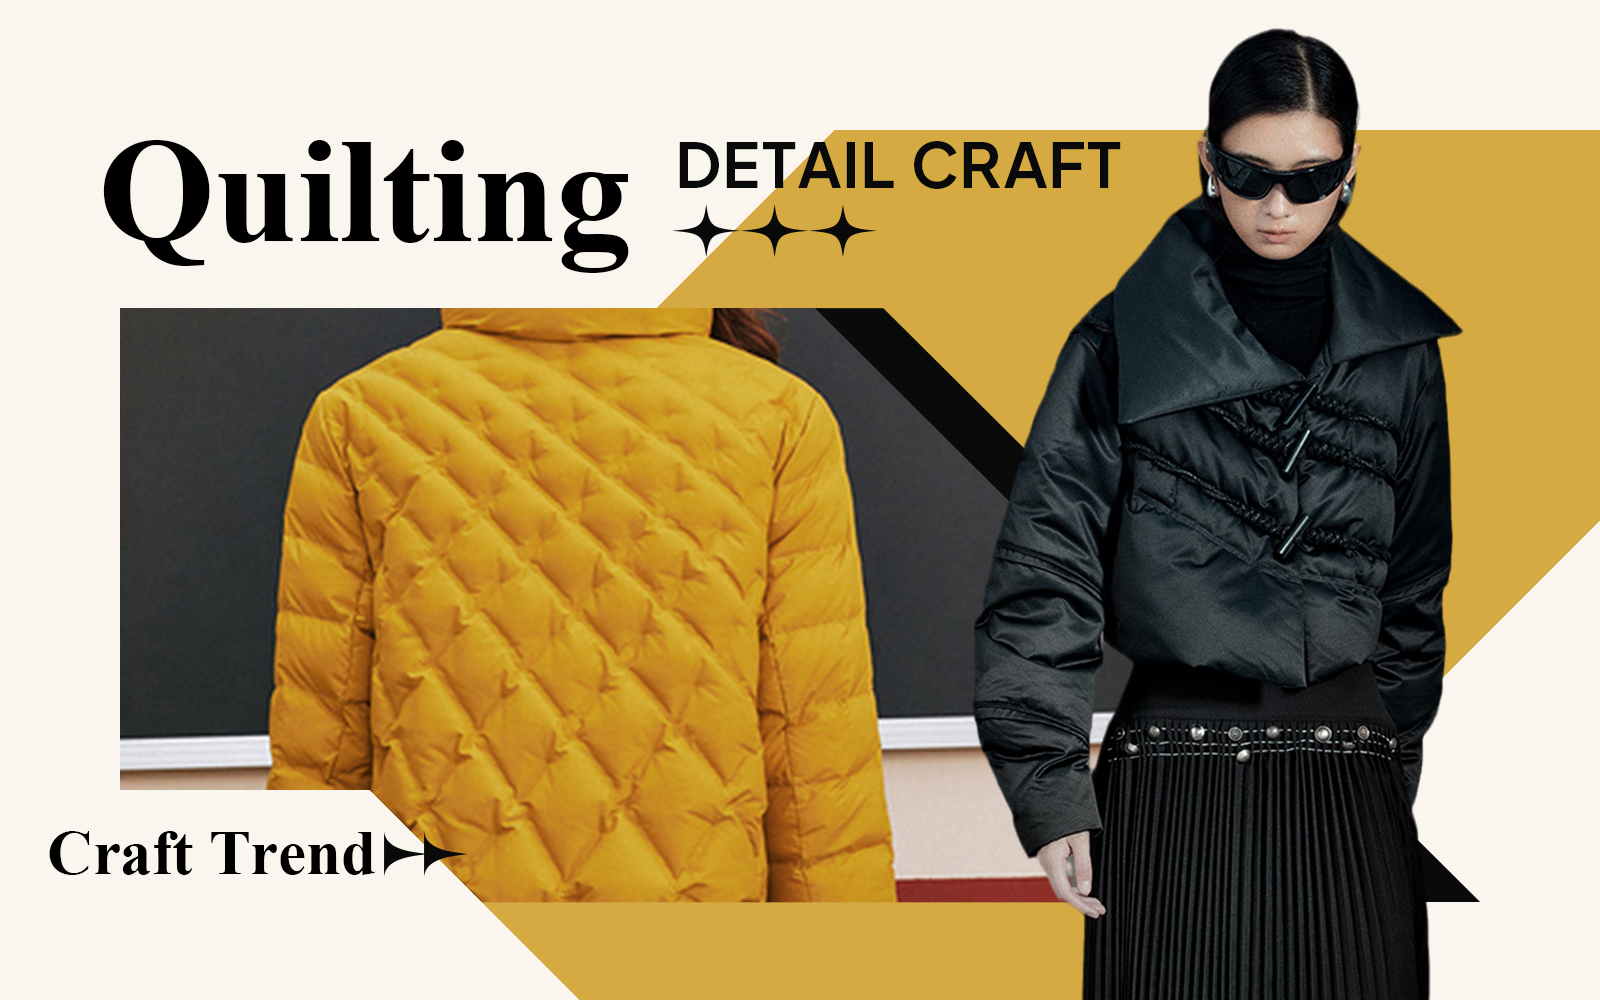 Texture Quilting -- The Craft Trend for Women's Down Jacket